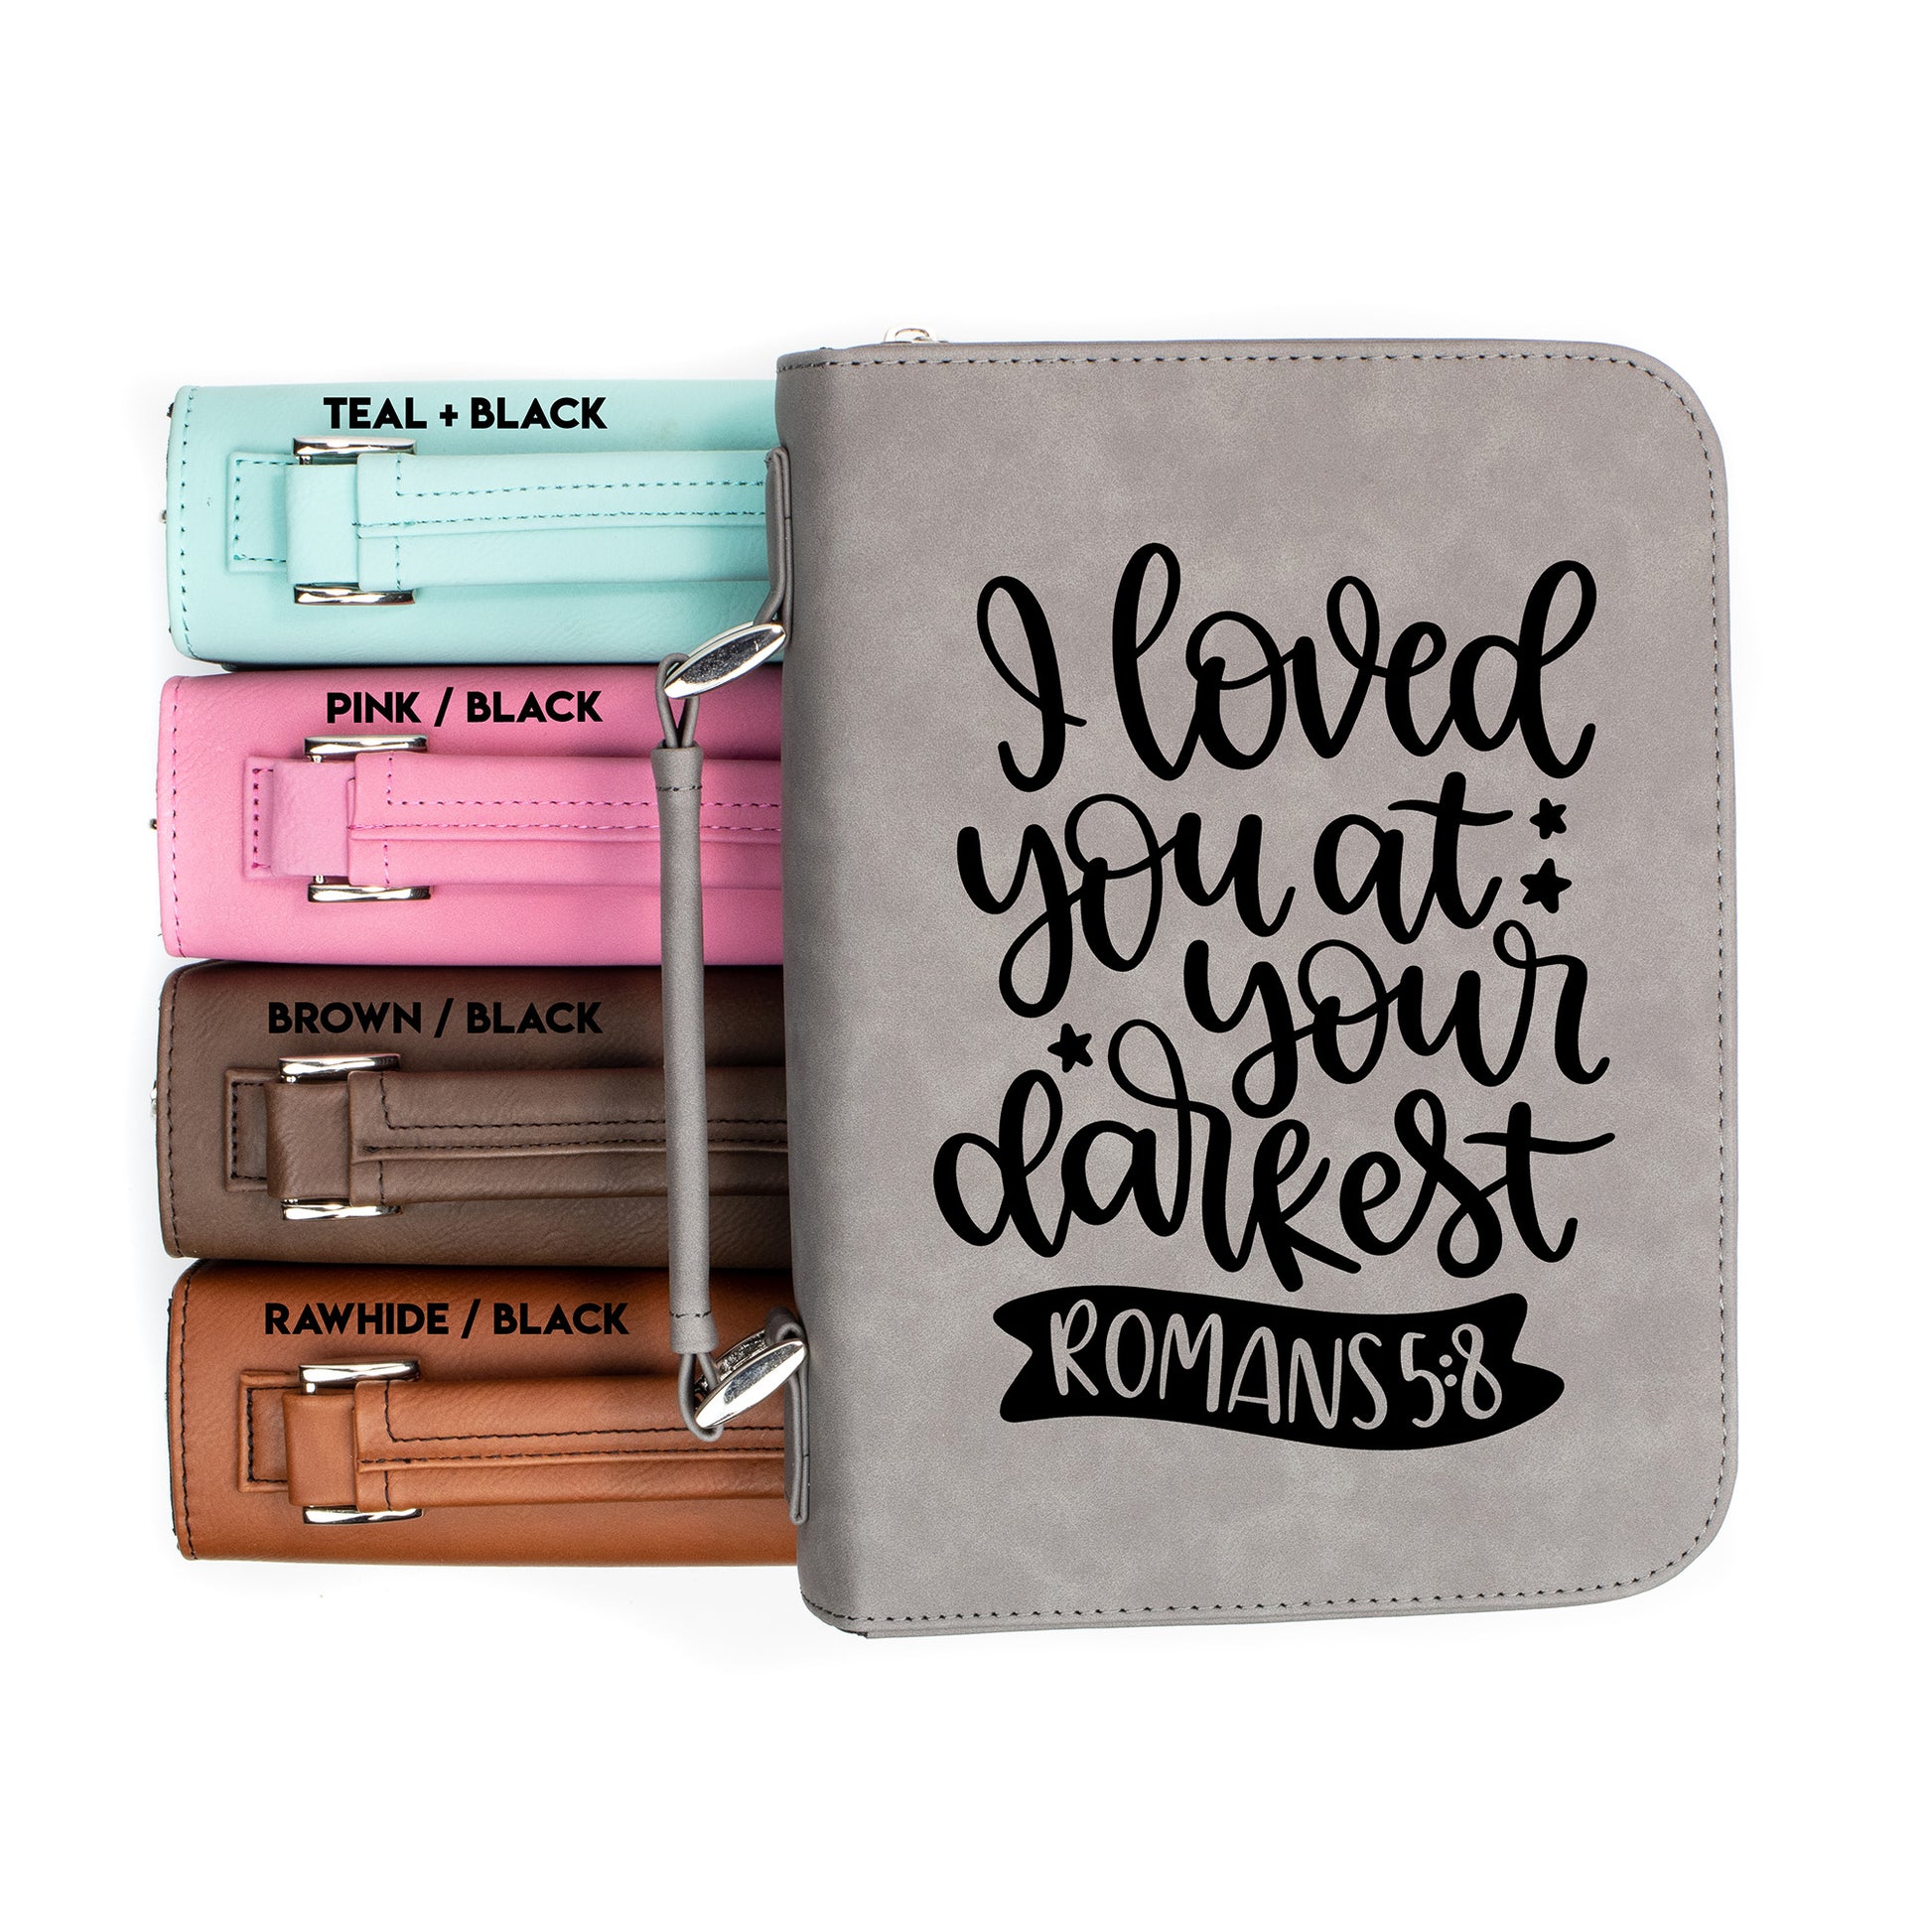 I Loved You At Your Darkest Romans 5:8 Bible Cover | Faux Leather With Handle + Pockets